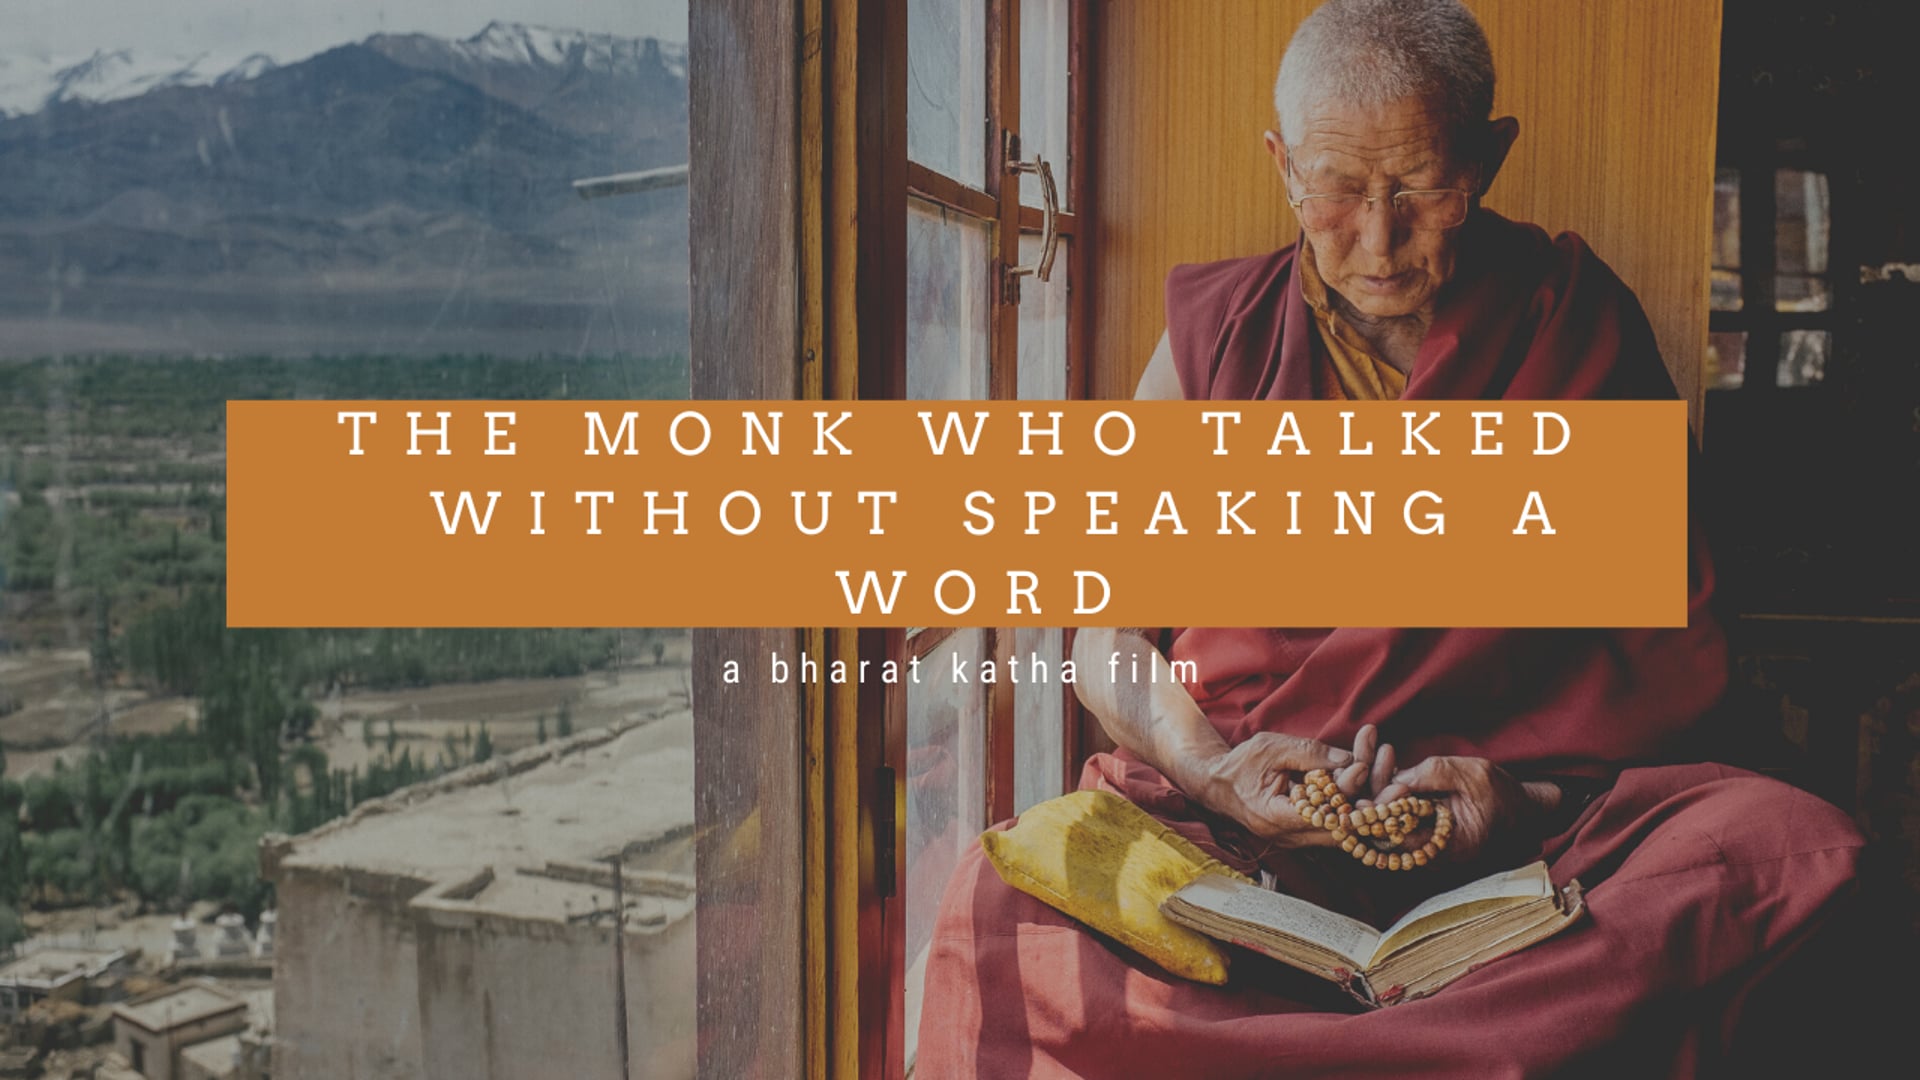 A Monk who talked without speaking a word